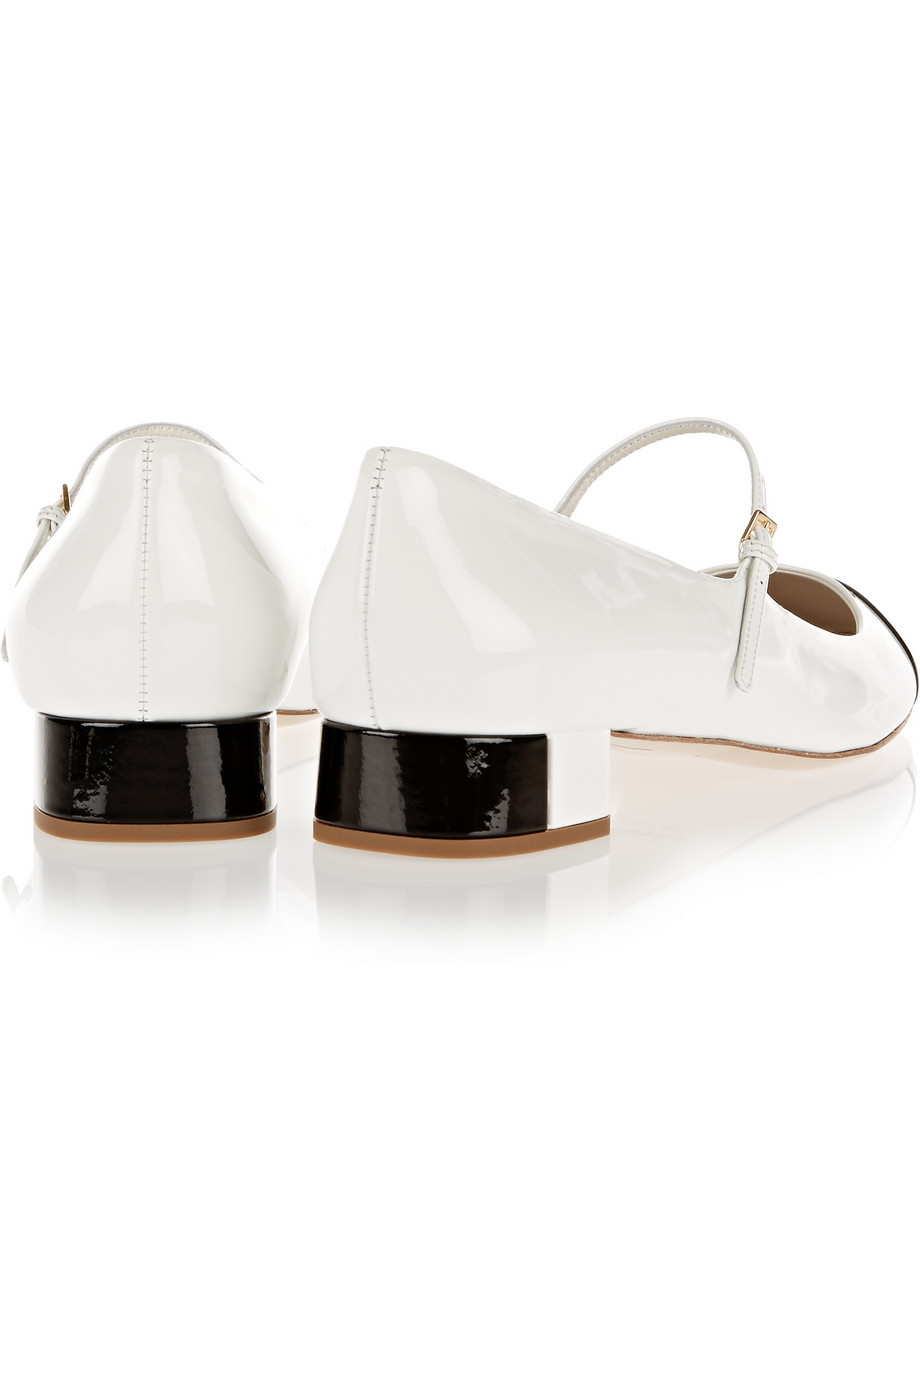 Miu Miu Two-Tone Patent-Leather Mary Jane Flats in White | Lyst